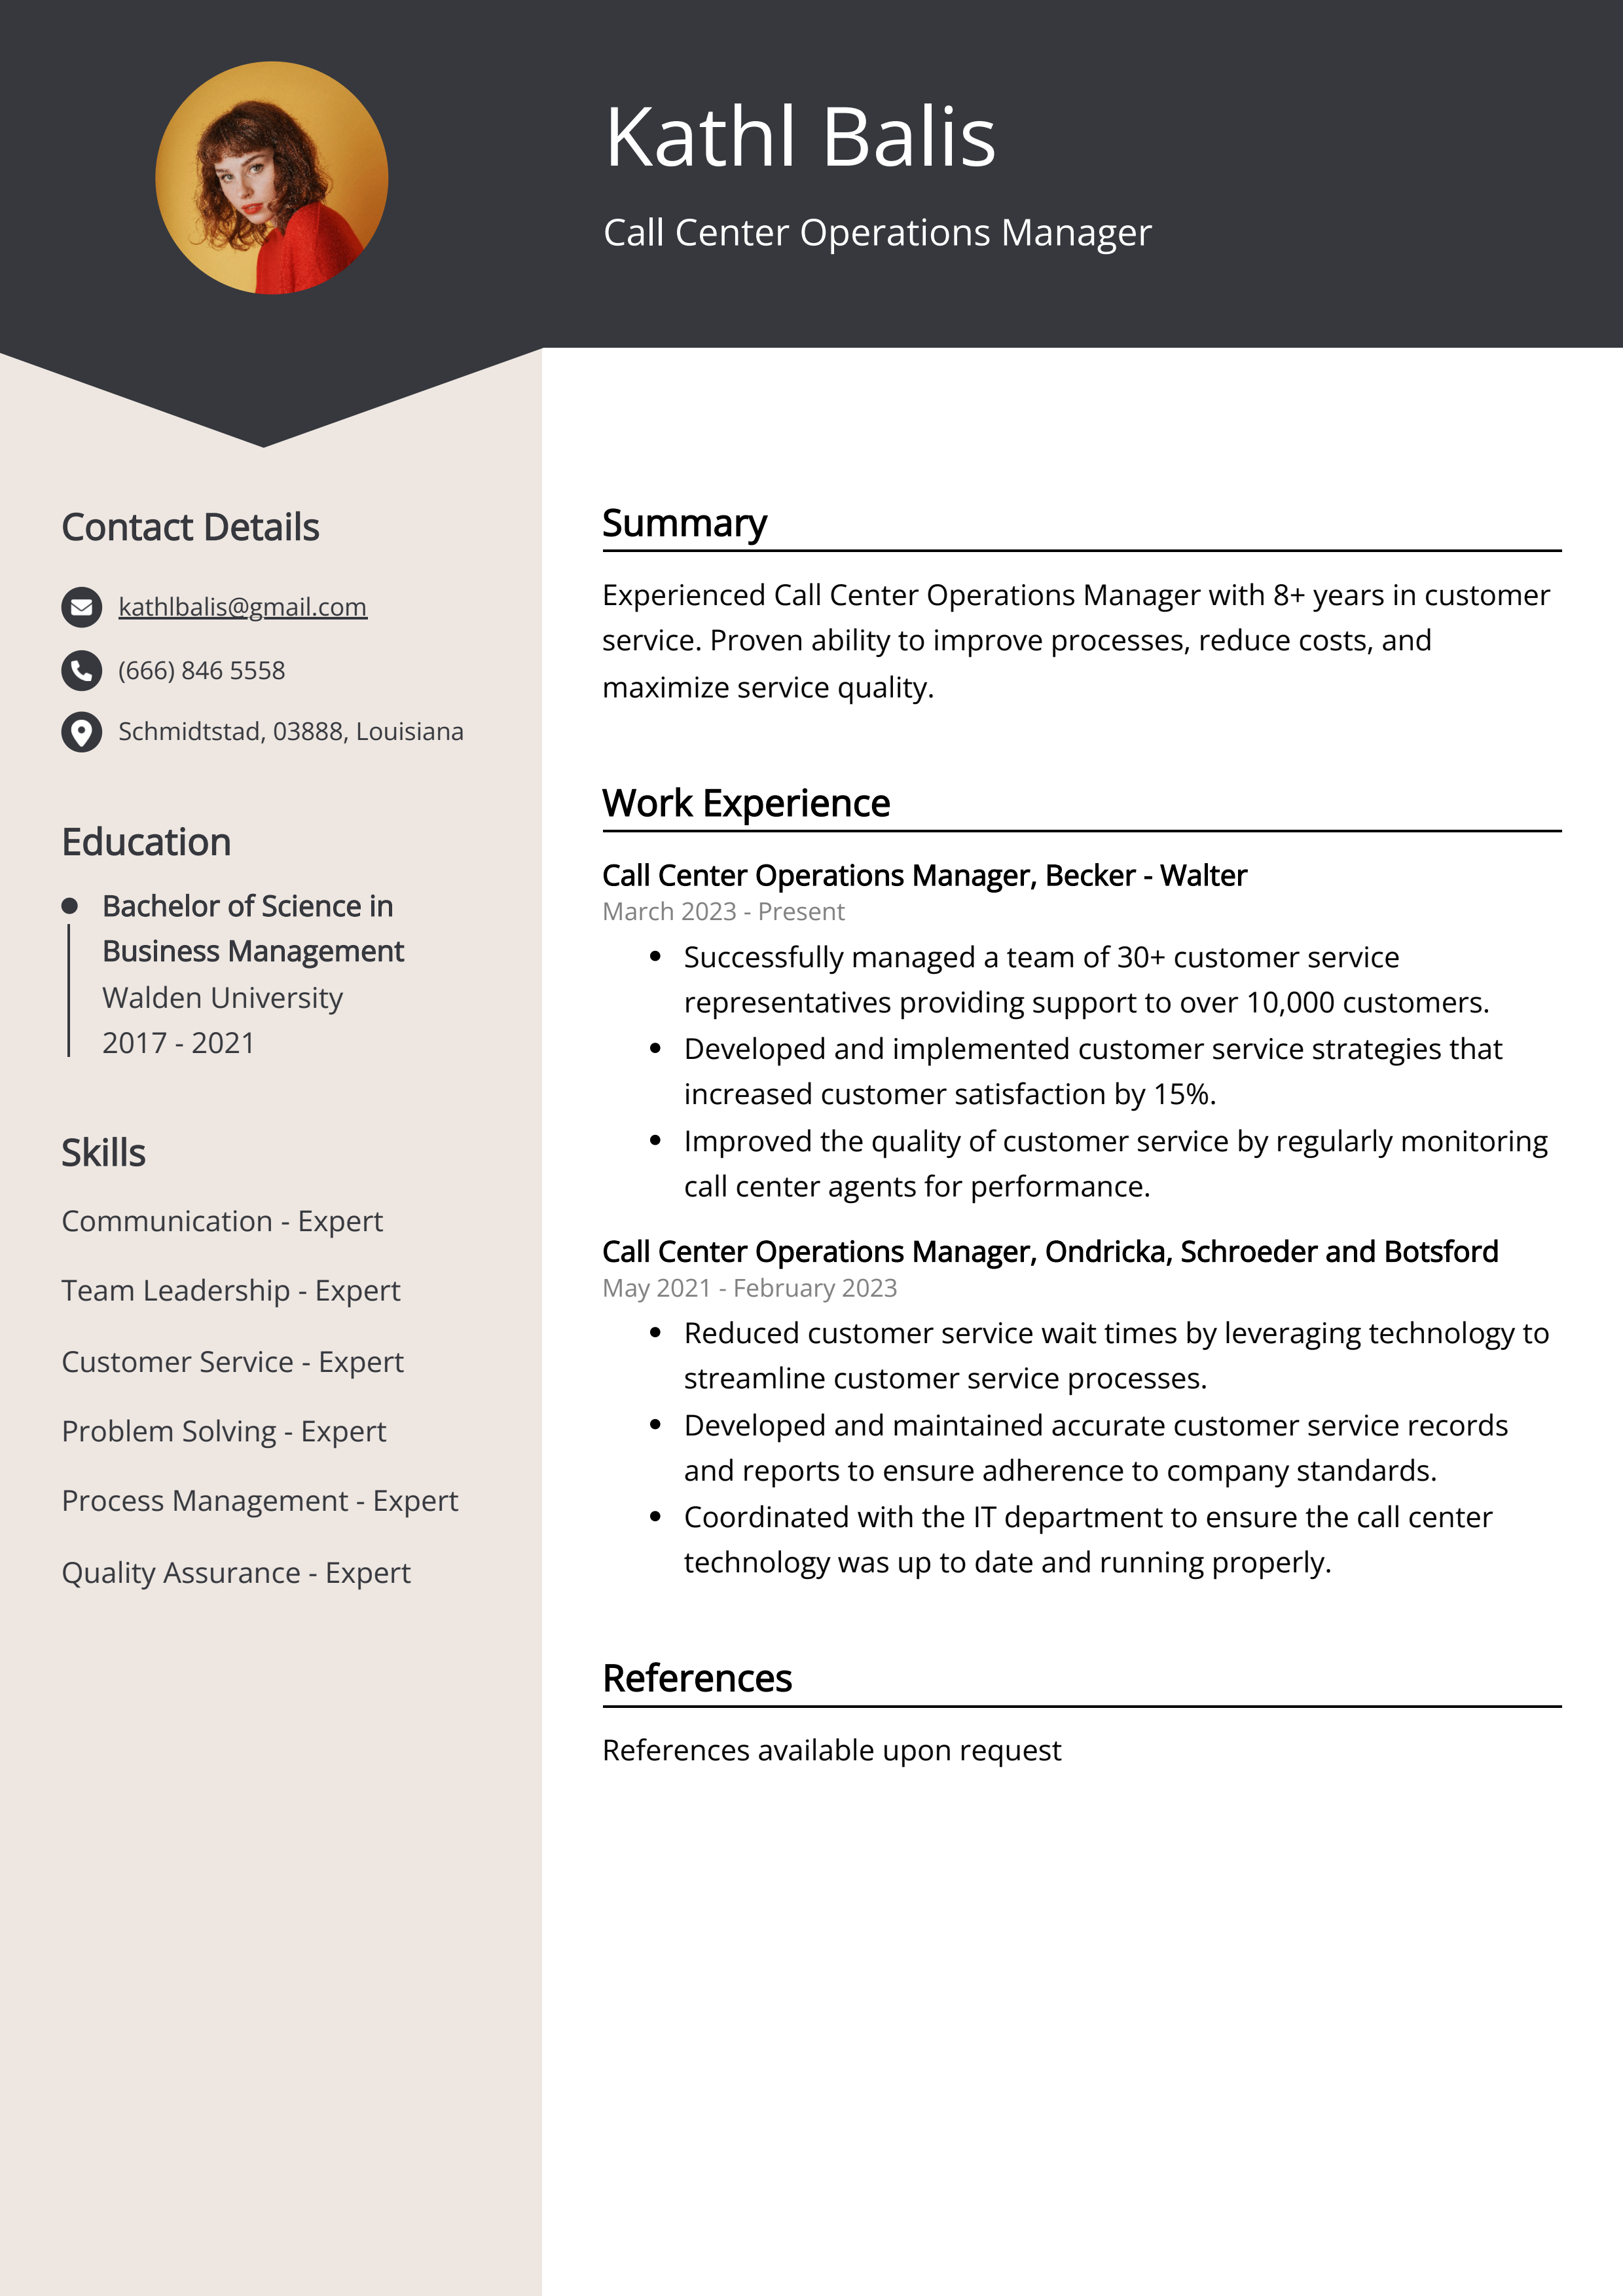 Call Center Operations Manager Resume Example